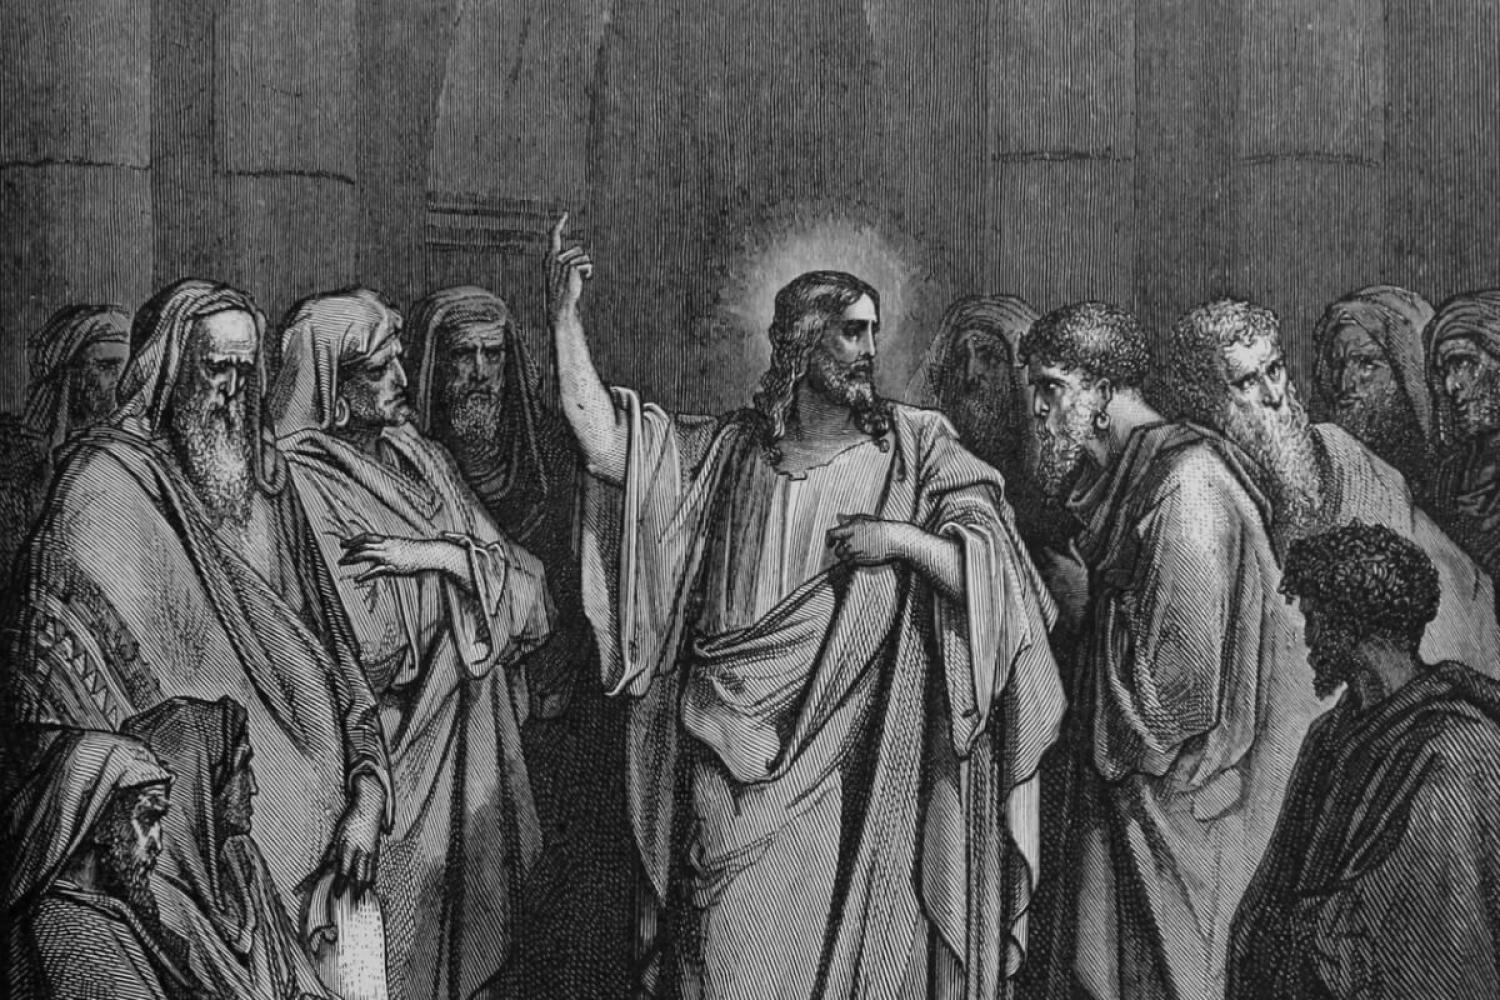 Gustave Dore's "Christ in the Synagogue" 